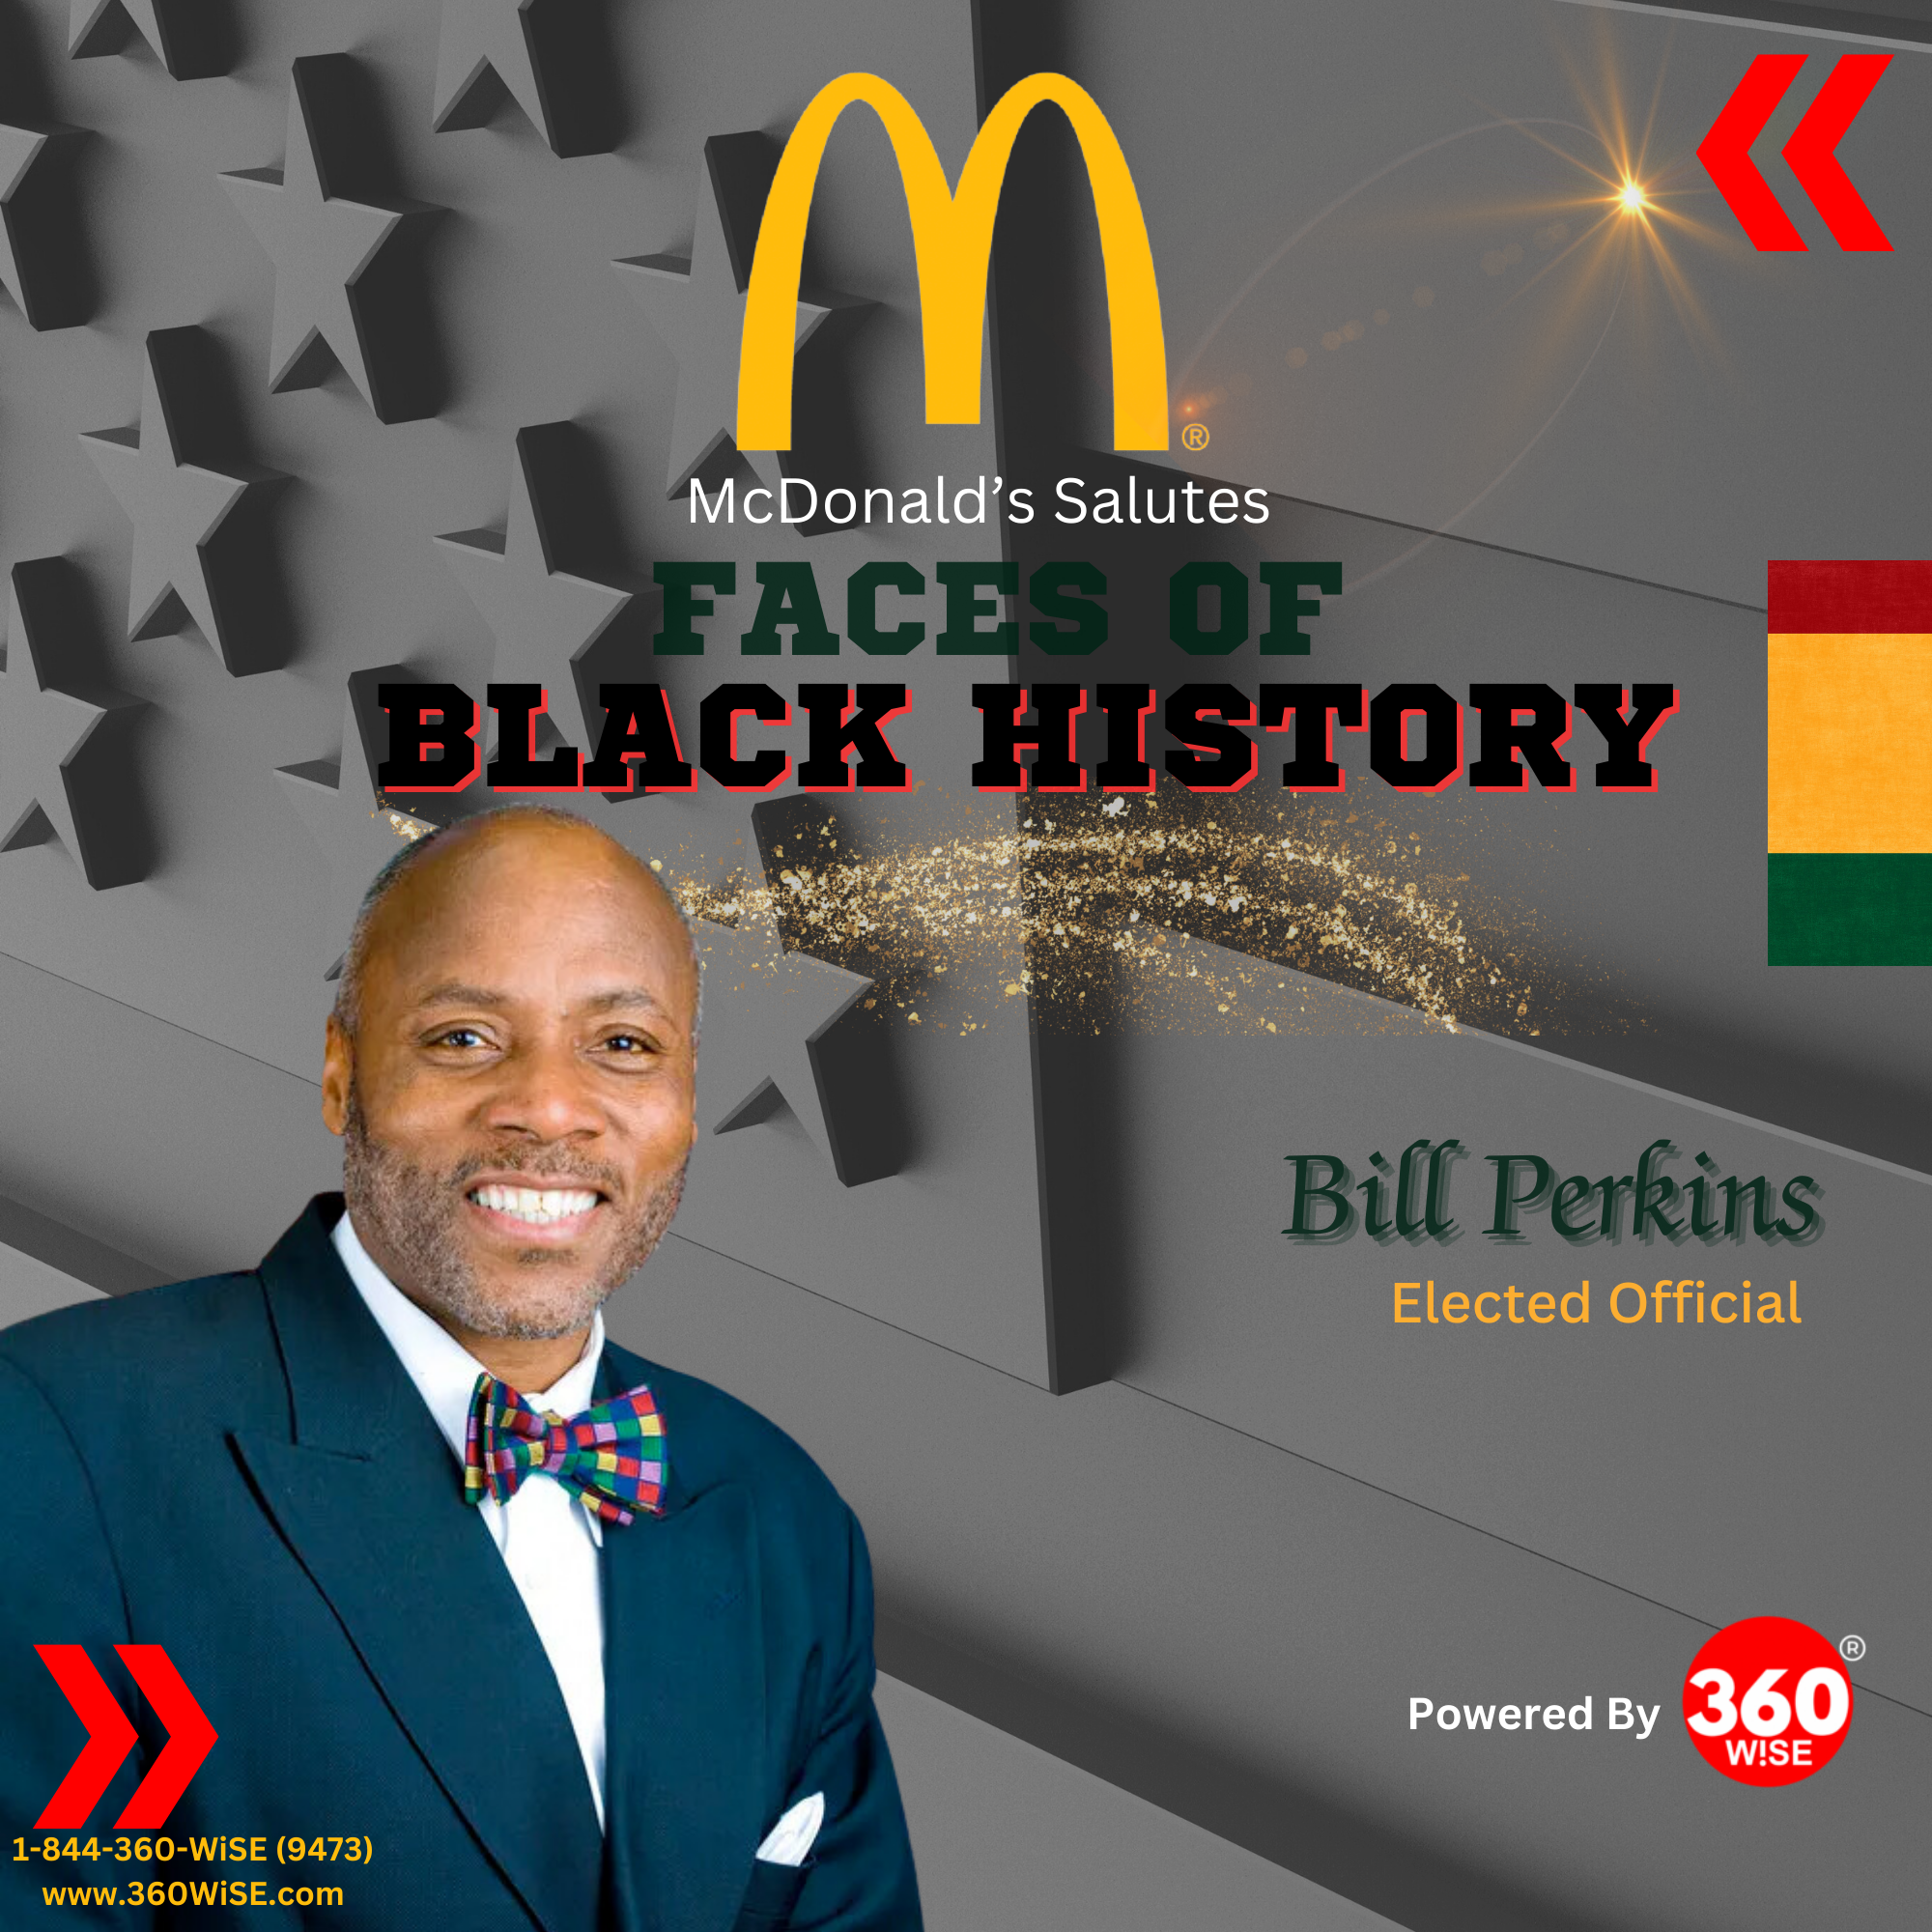 McDonald's Faces of Black History Salutes Bill Perkins. Powered by 360WiSE